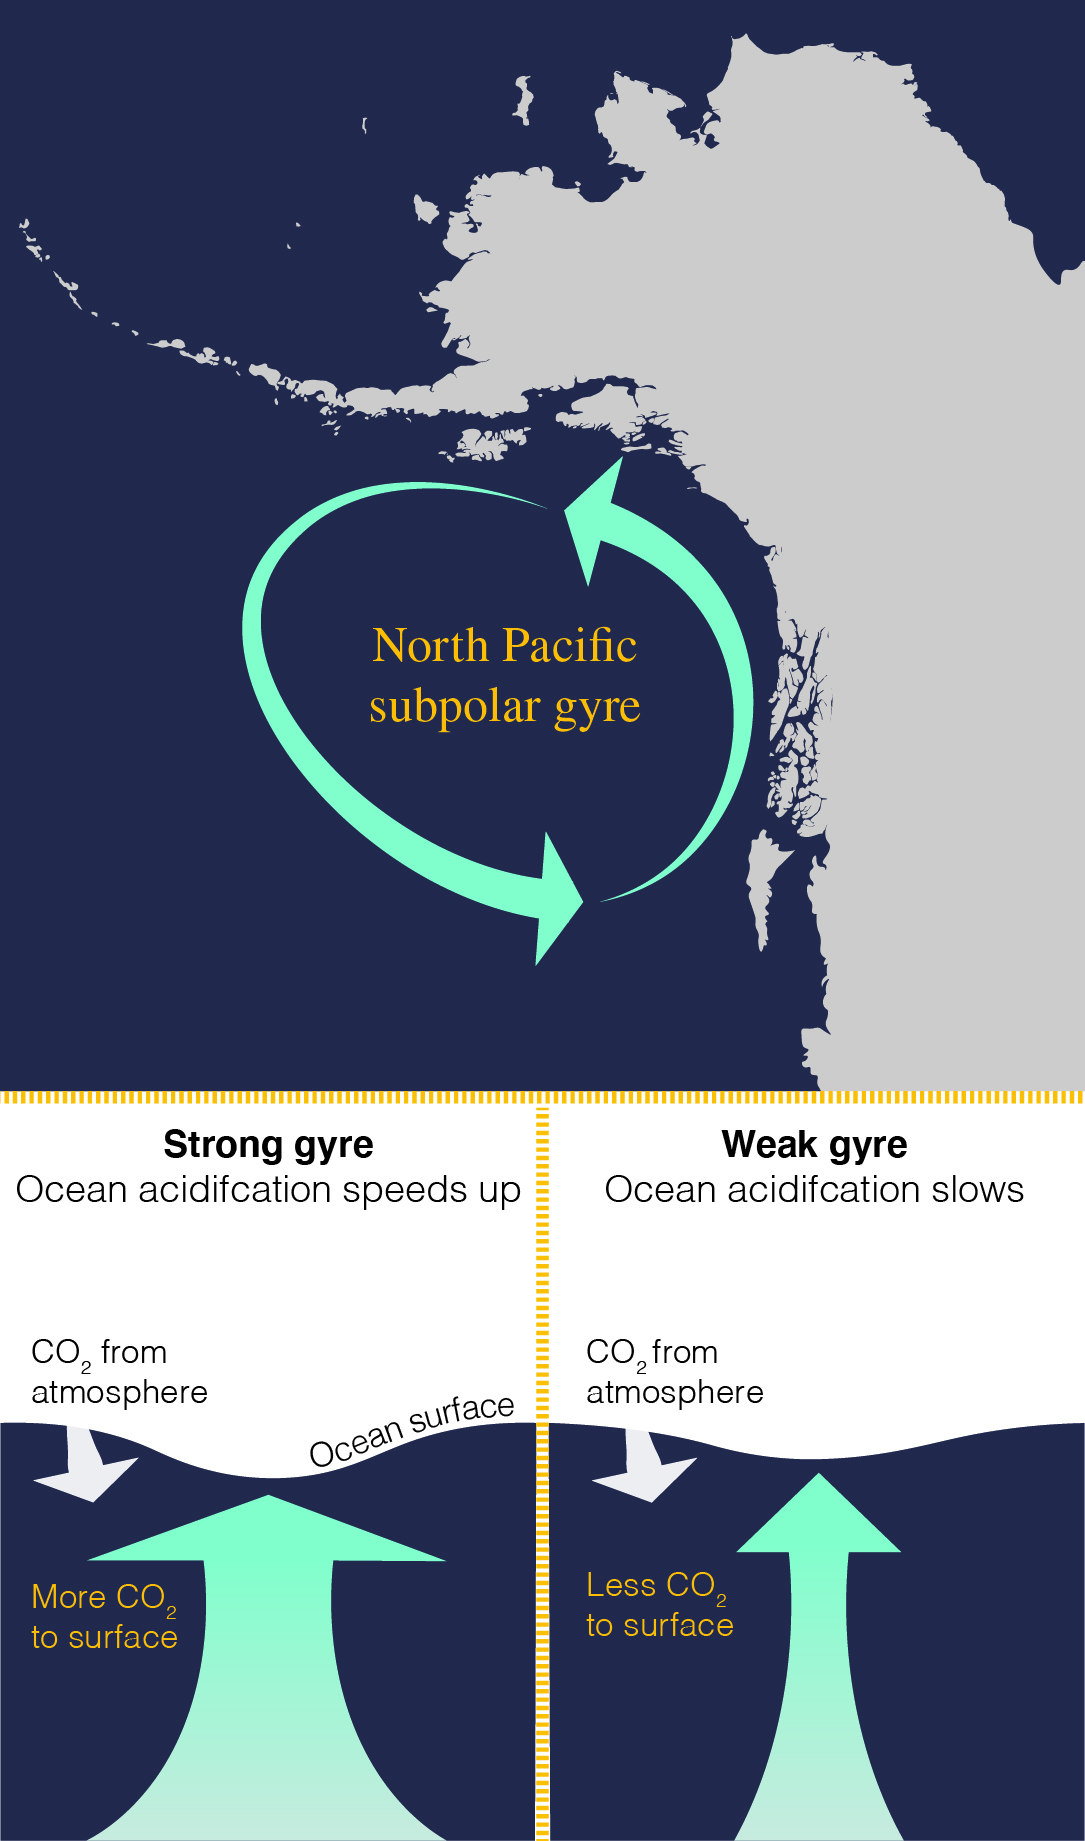 This graphic of the North Pacific subpolar gyre in the Gulf of Alaska shows how the strength of the gyre can speed or slow ocean acidification based on the amount of carbon dioxide brought to the surface of the ocean. 